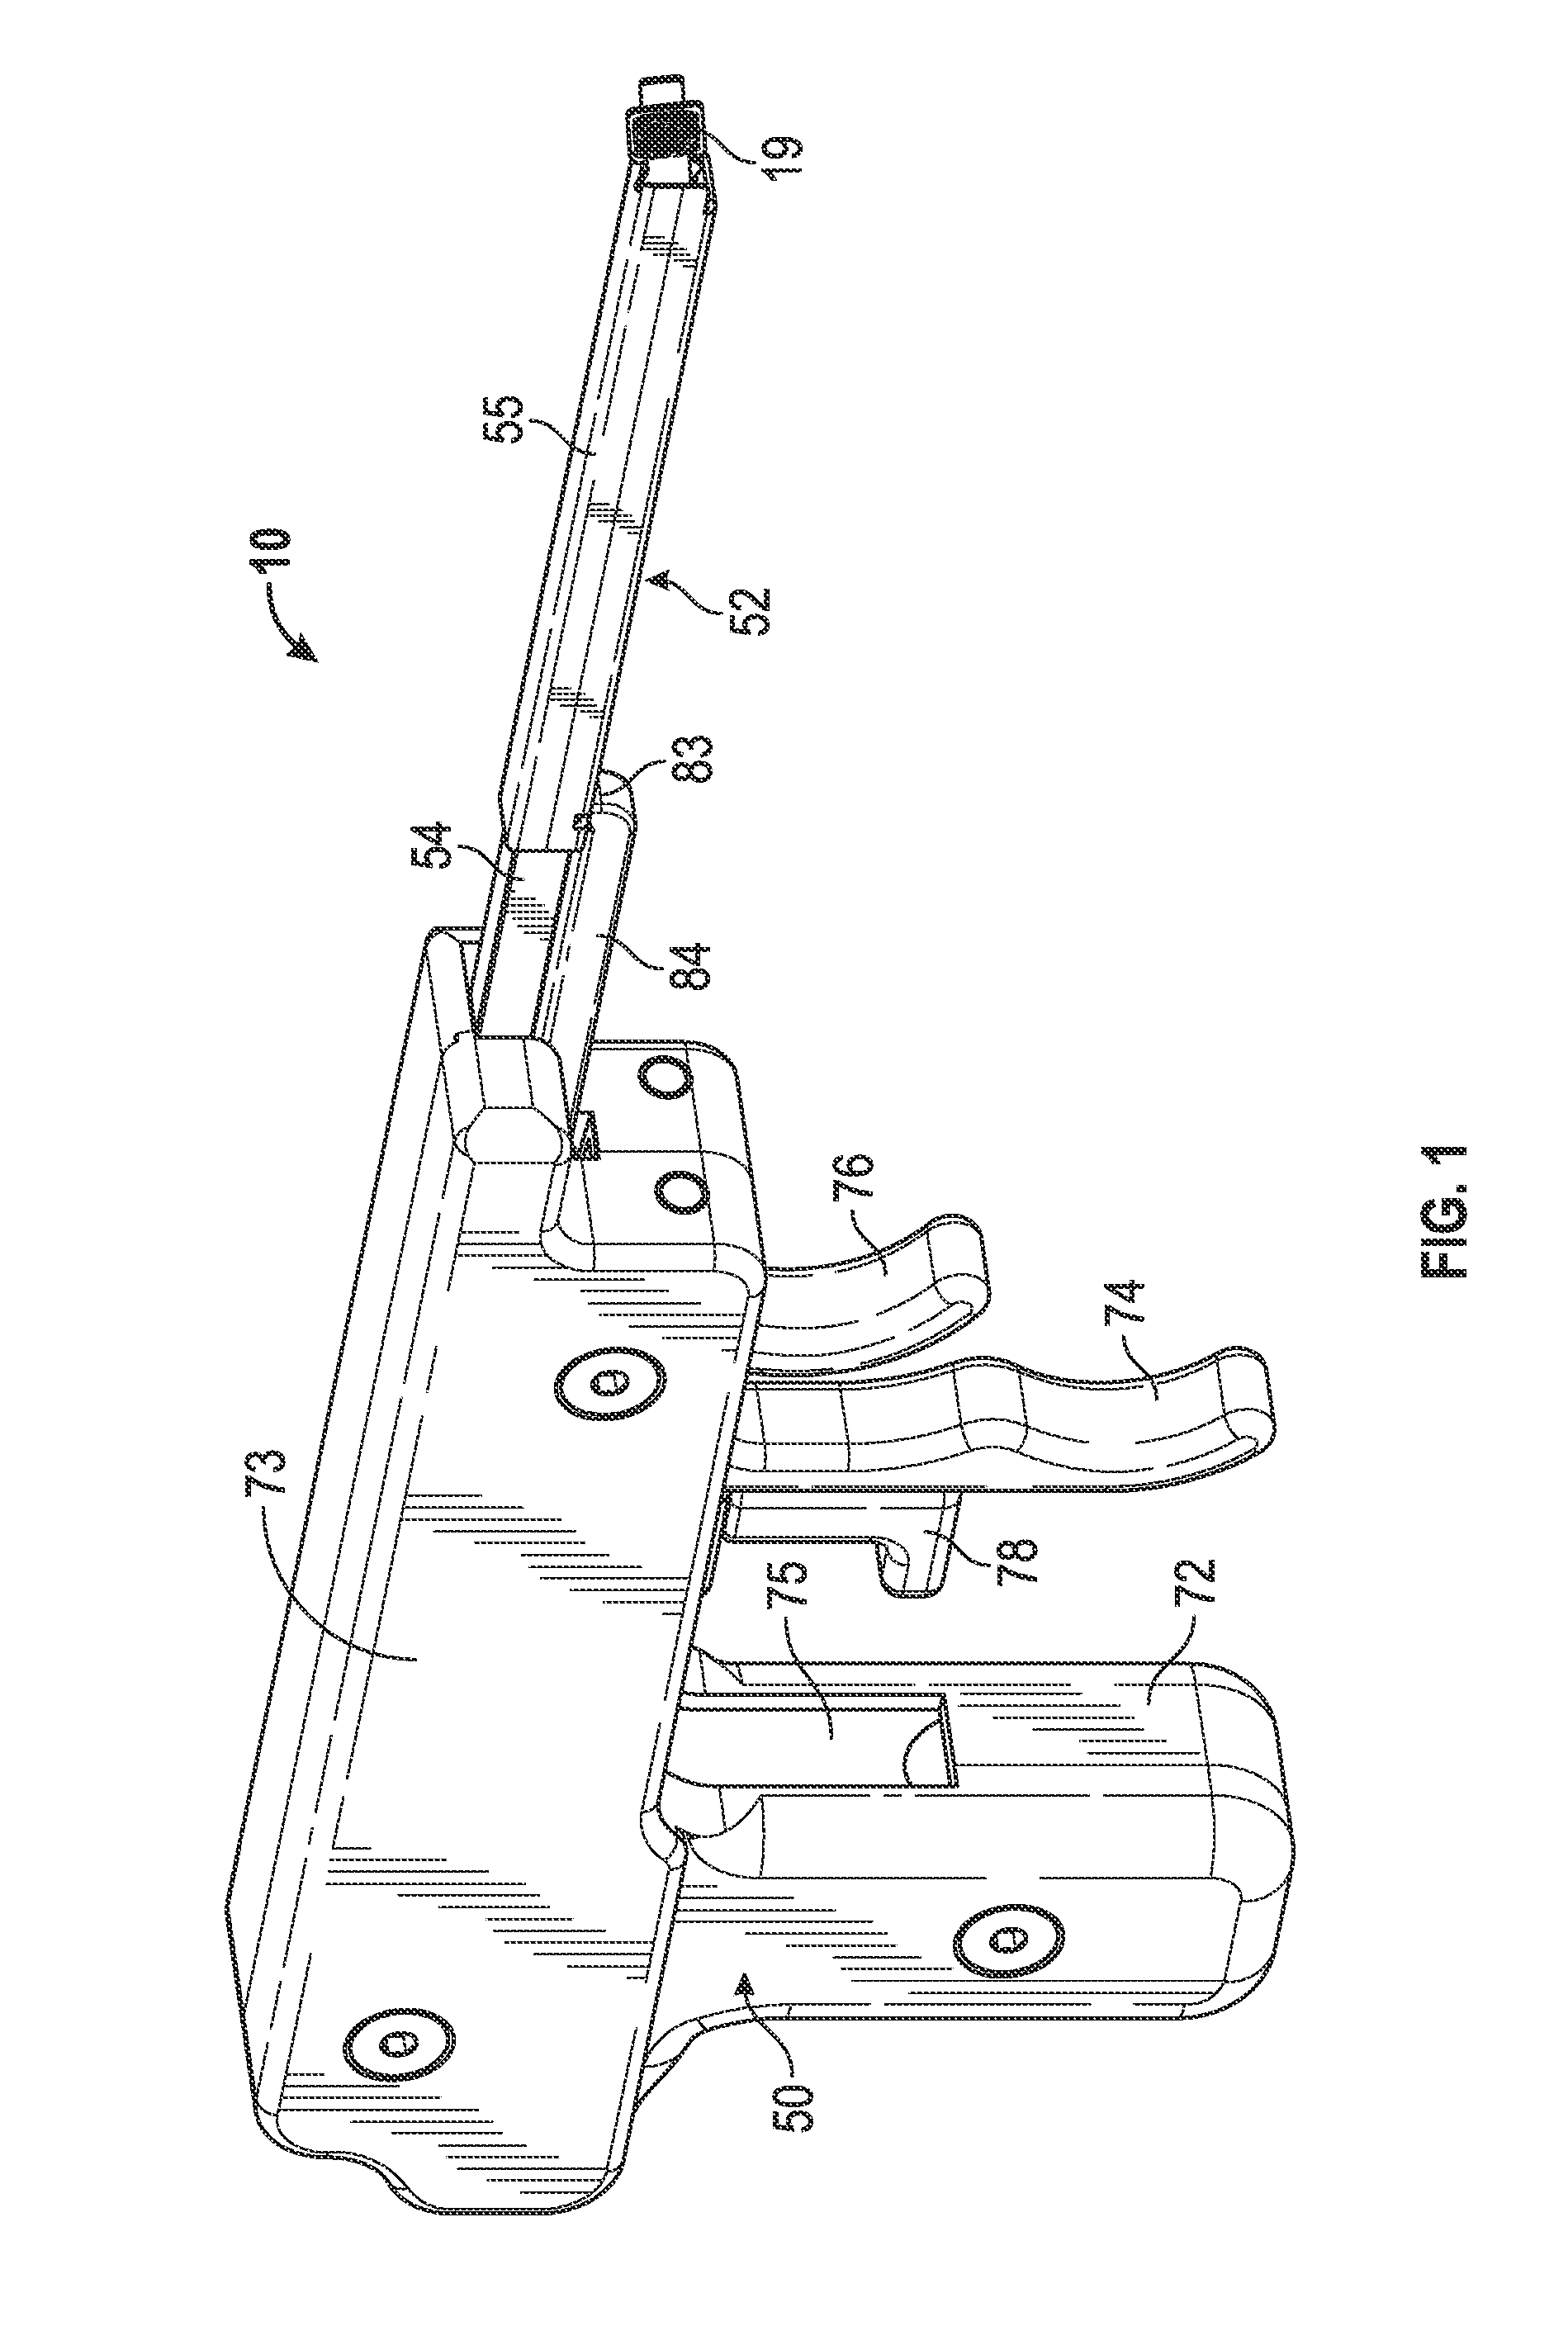 Insertion tool and insertion method for arterial tamponade device